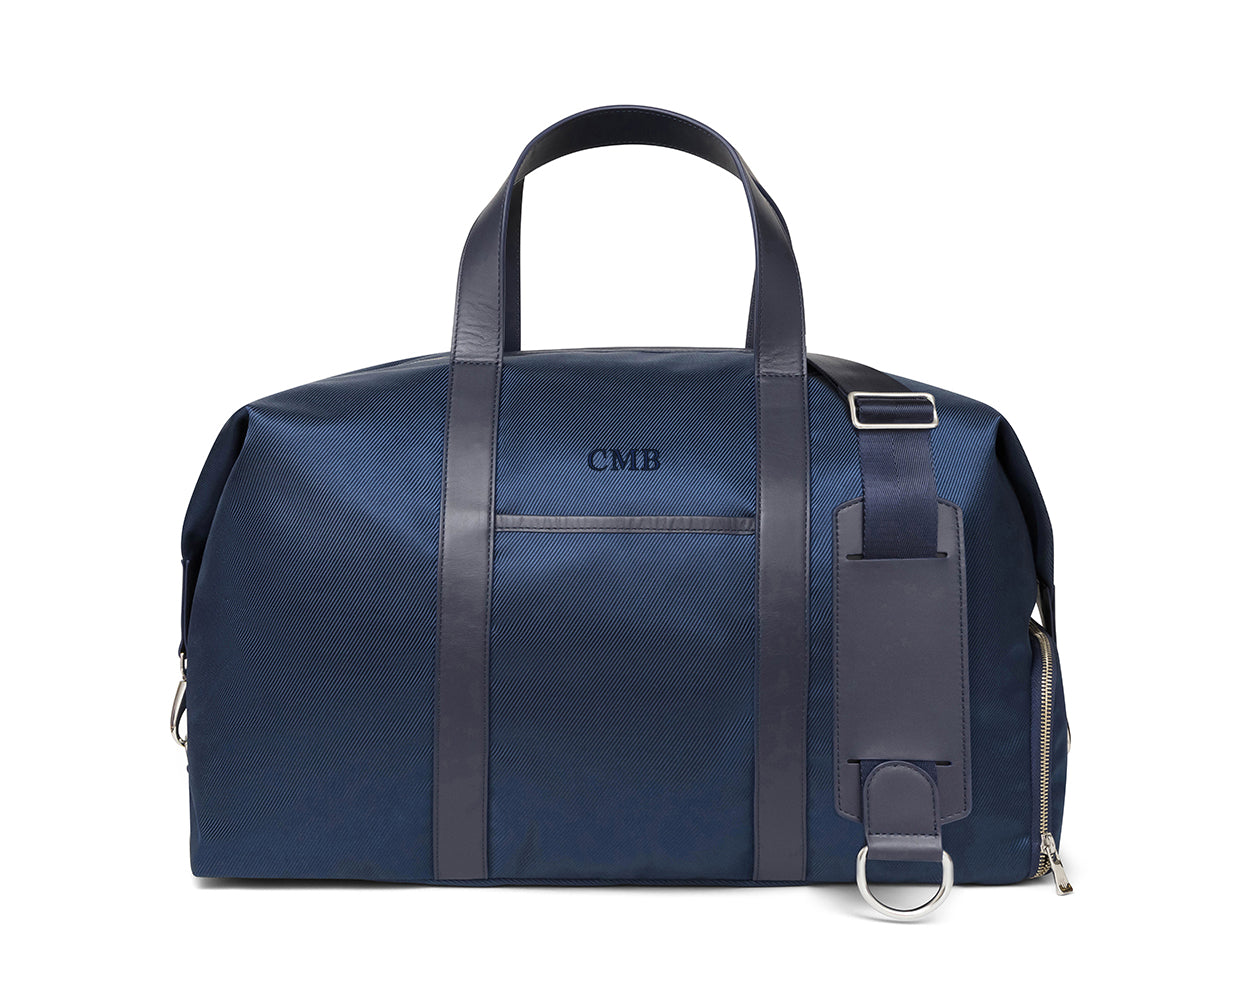 The Byers Duffel Bag: Navy Ballistic with Navy Embroidered Lettering